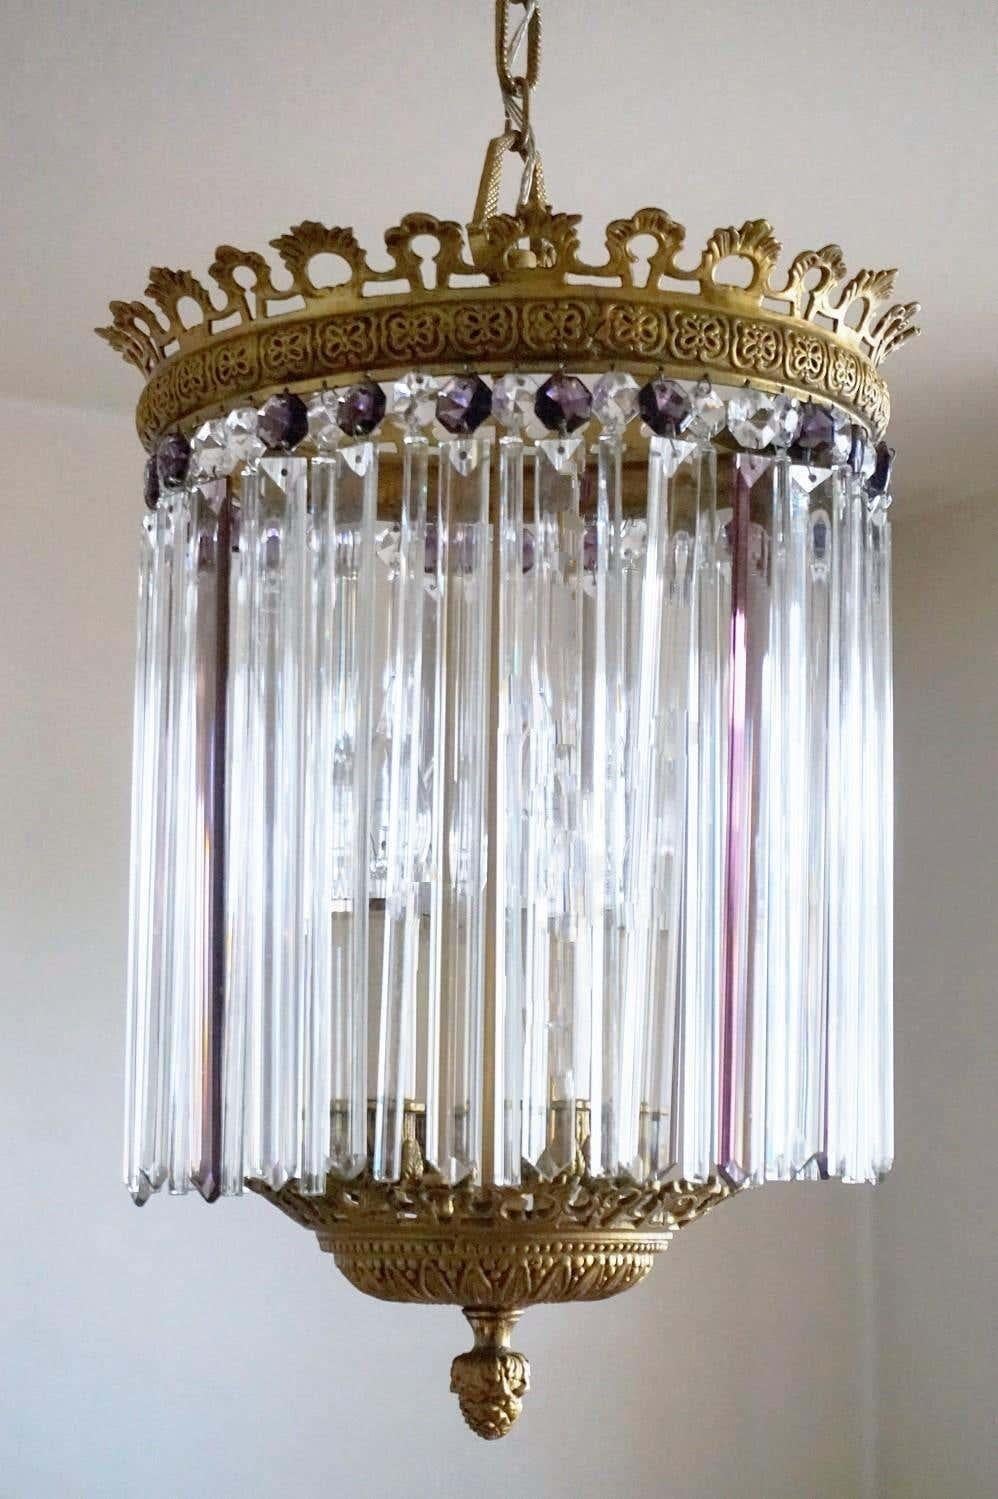 One of kind Regency style long clear and amethyst faceted crystal prism lantern, France, 1910-1920. Gilt bronze mounts with integrated central four-light candelabra cluster.
Very good condition, beautiful aged patina to bronze, rewired.
Four E14